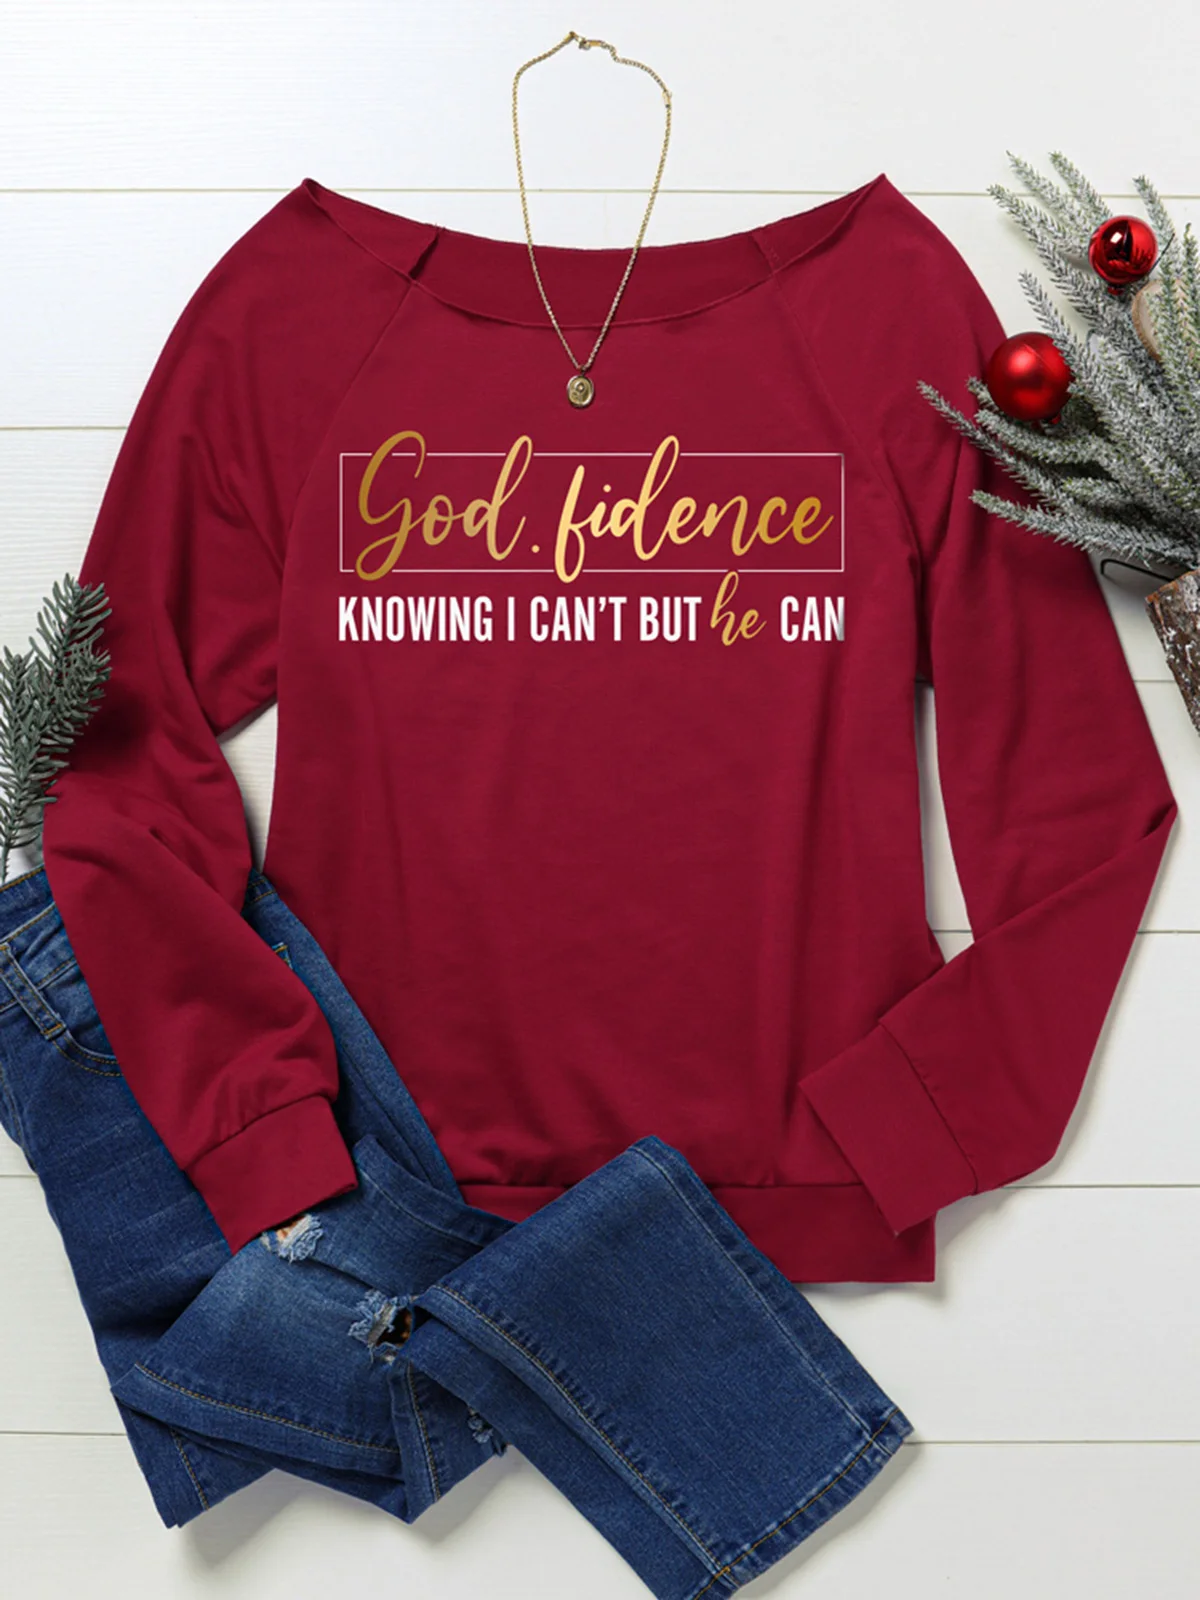 

2023 Autumn Winter God Fidence Knowing I Can't But He Can Sweatshirt Red Women Fashion Printed Casual Loose Retro Versatile Tops